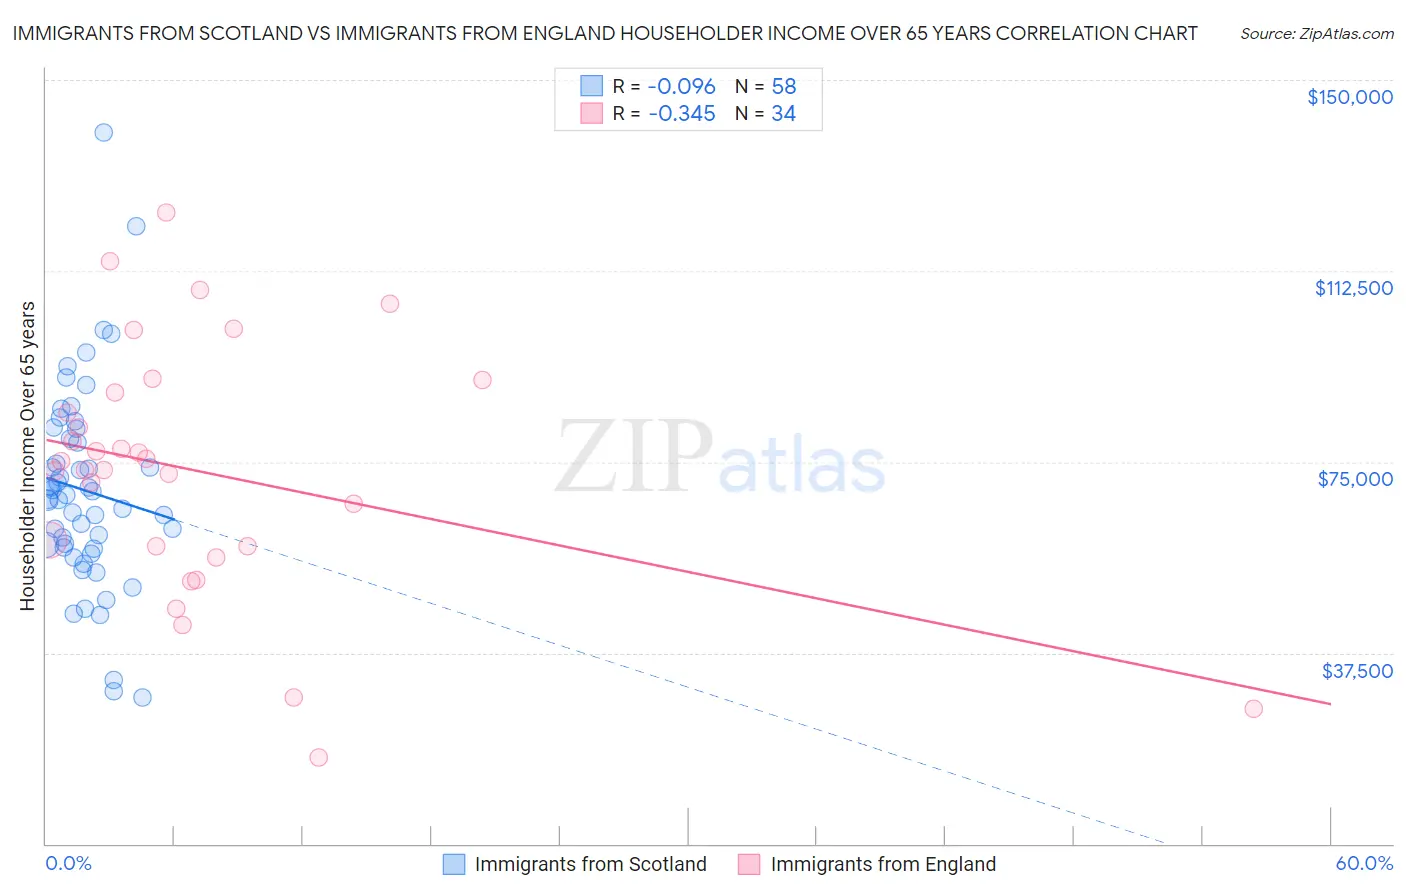 Immigrants from Scotland vs Immigrants from England Householder Income Over 65 years